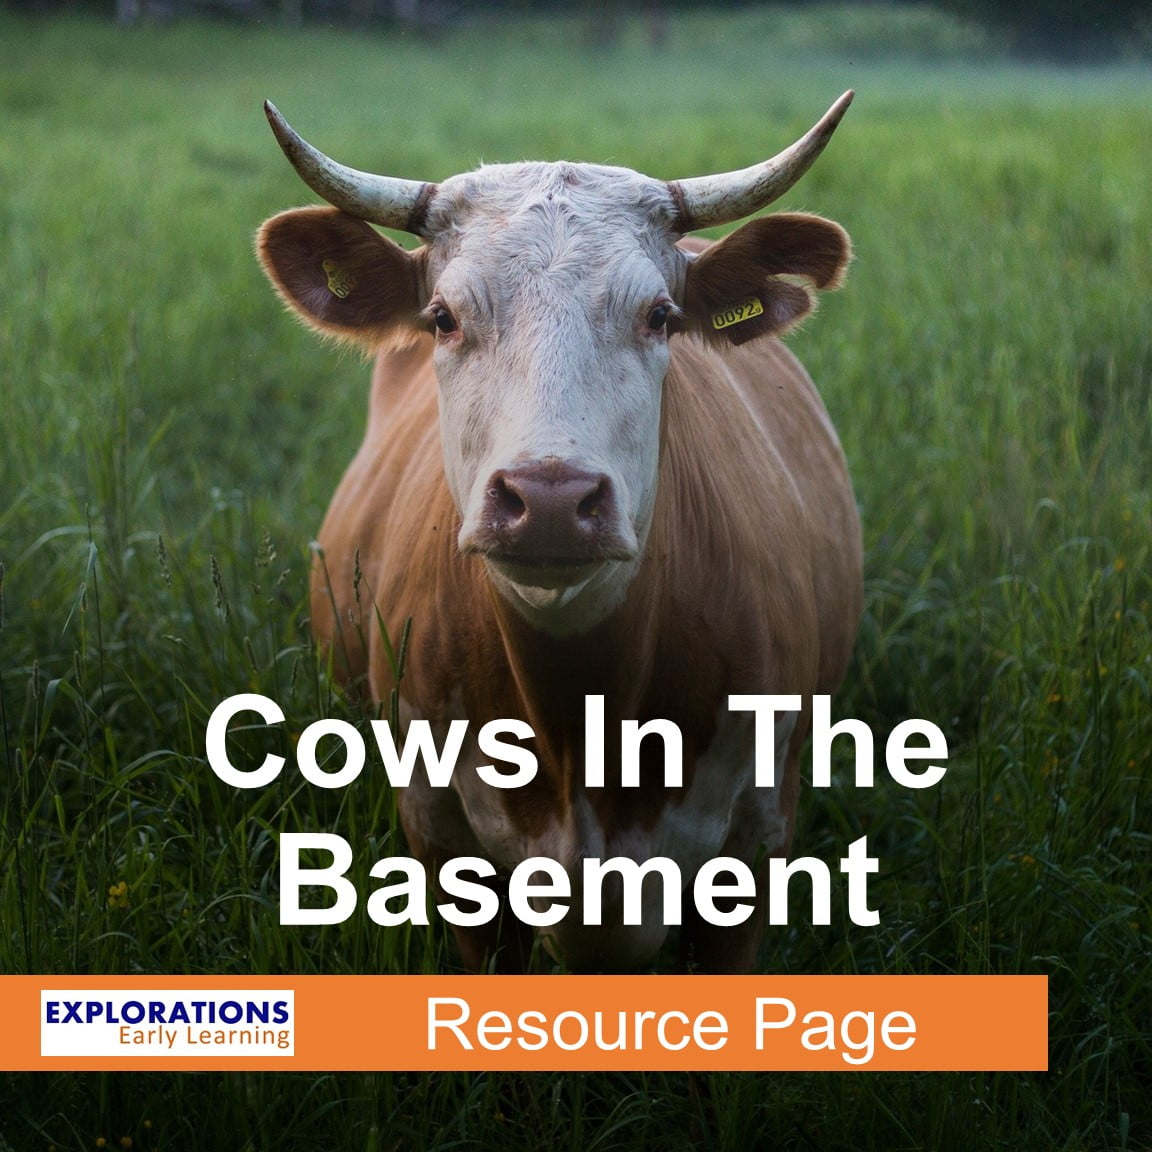 Cows In The Basement | Resource Page